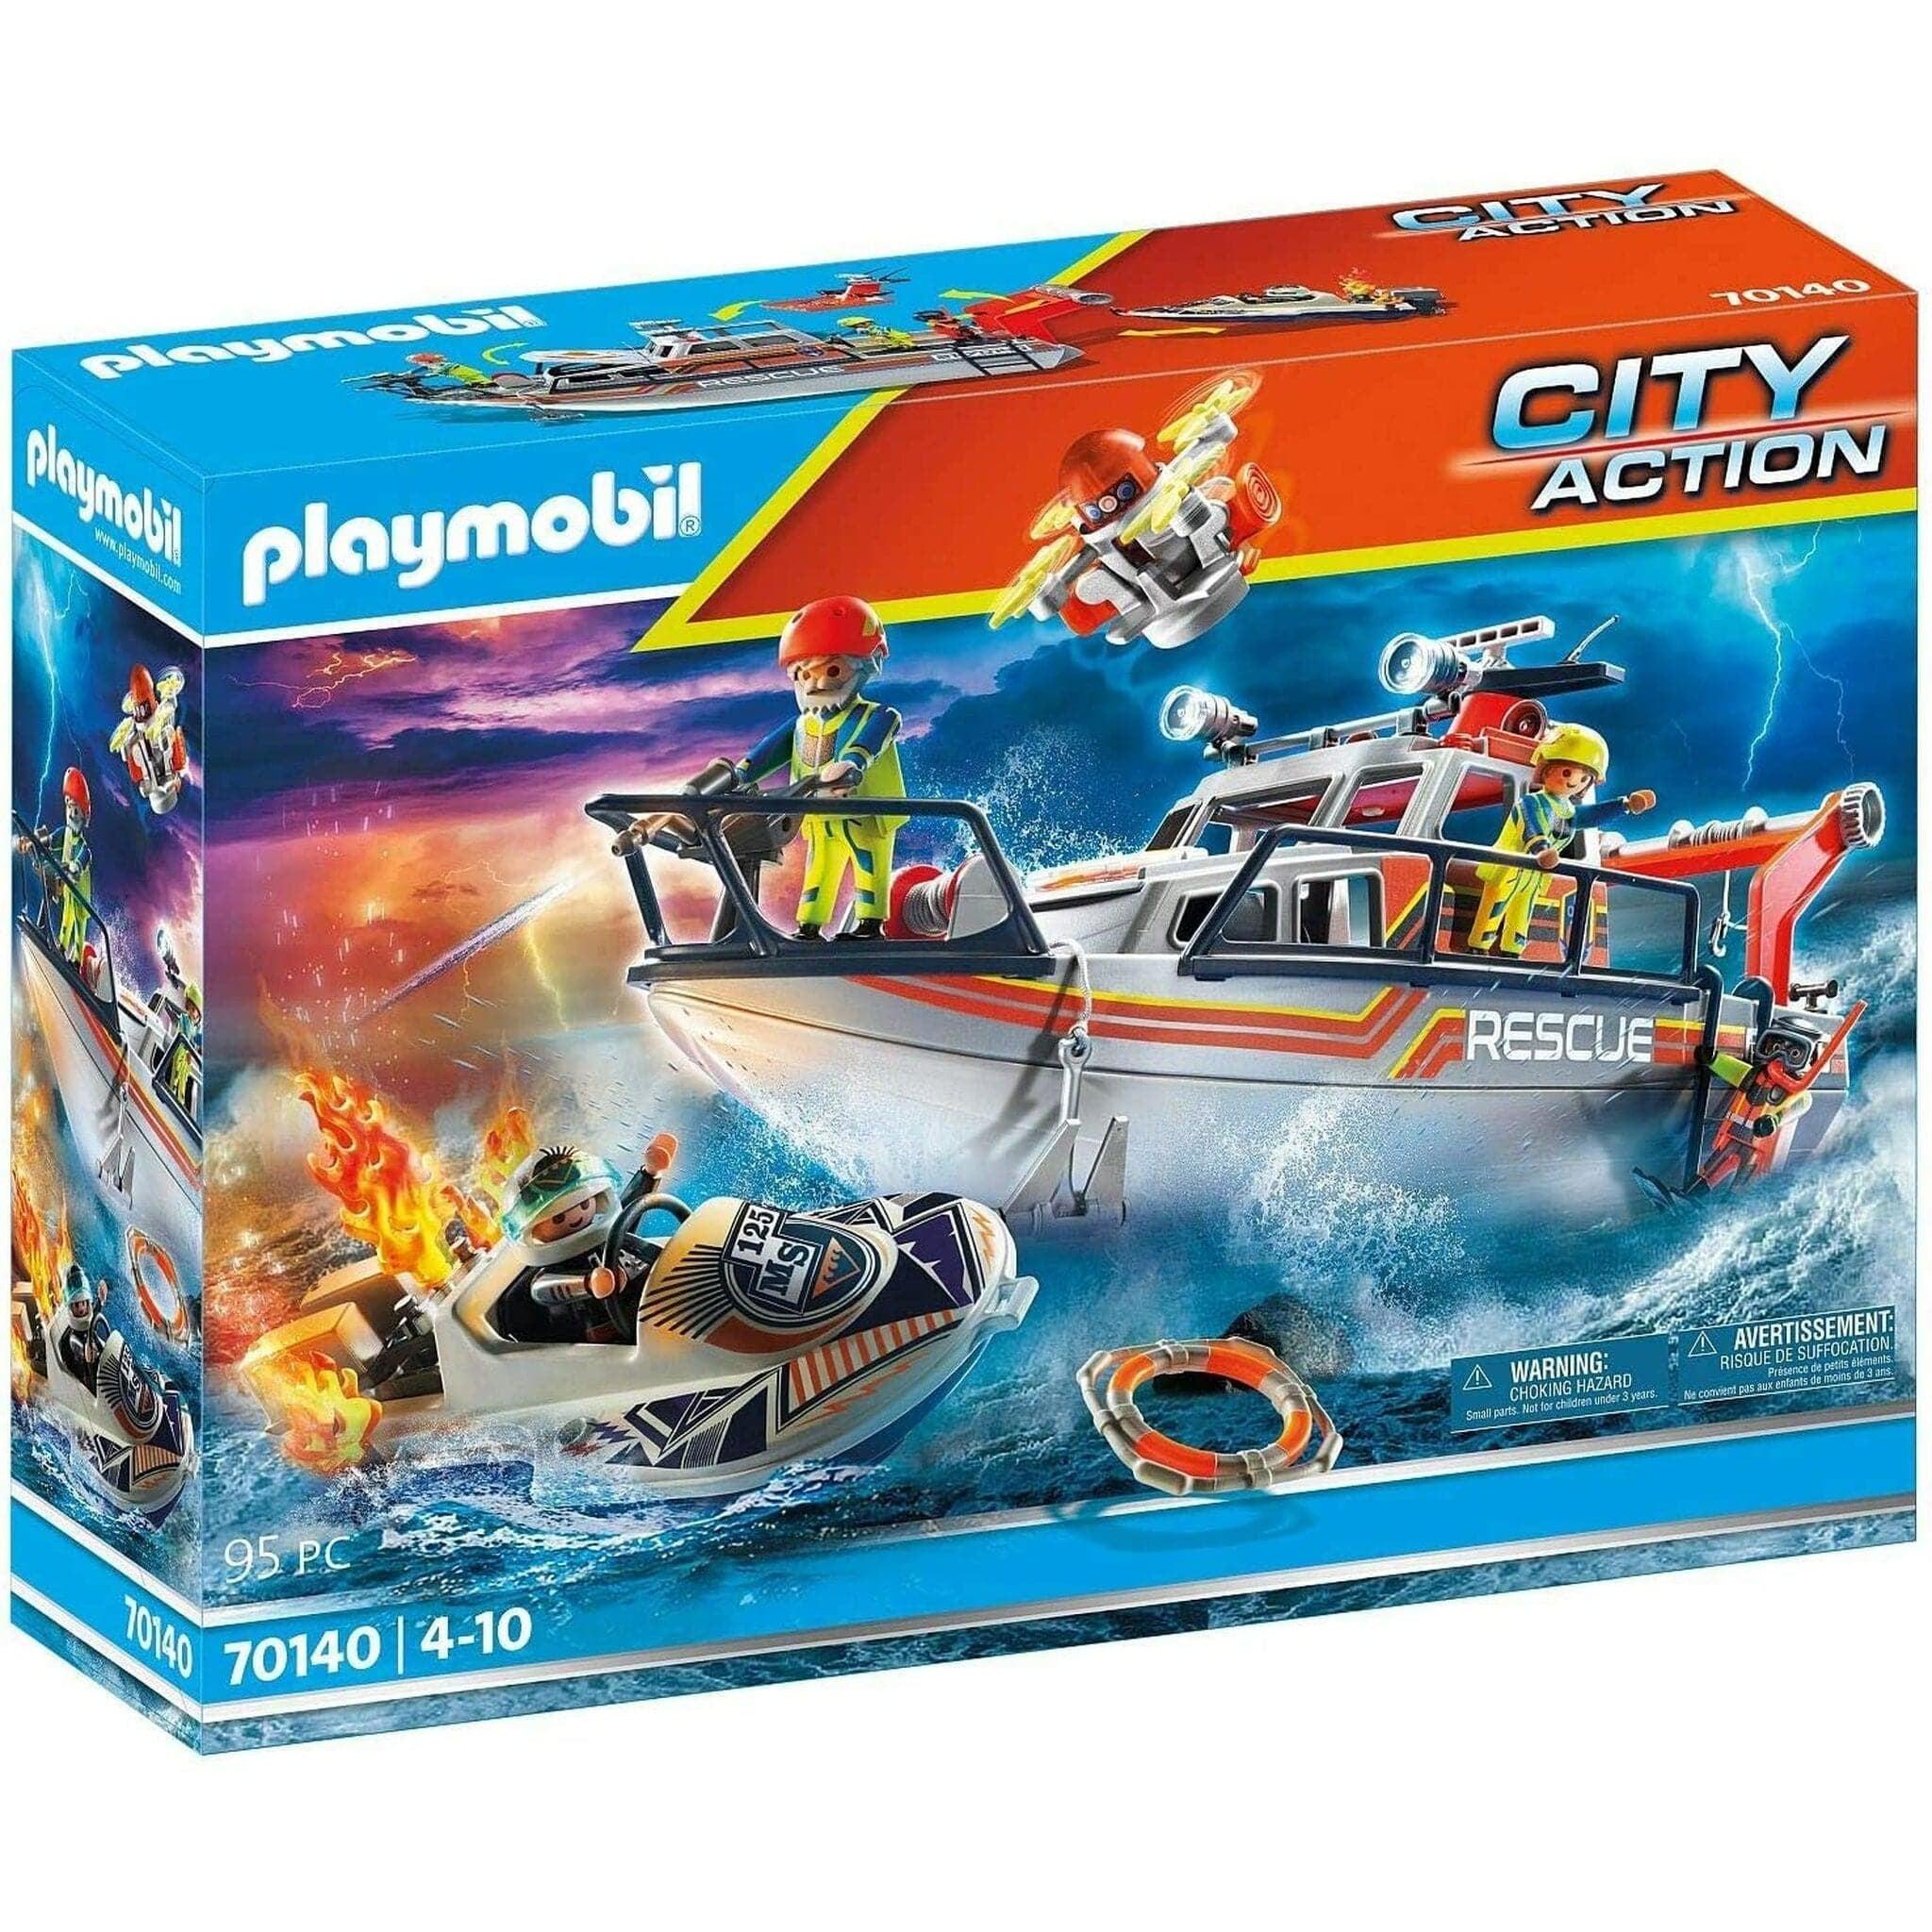 Playmobil-City Action - Fire Rescue With Personal Watercraft-70140-Legacy Toys